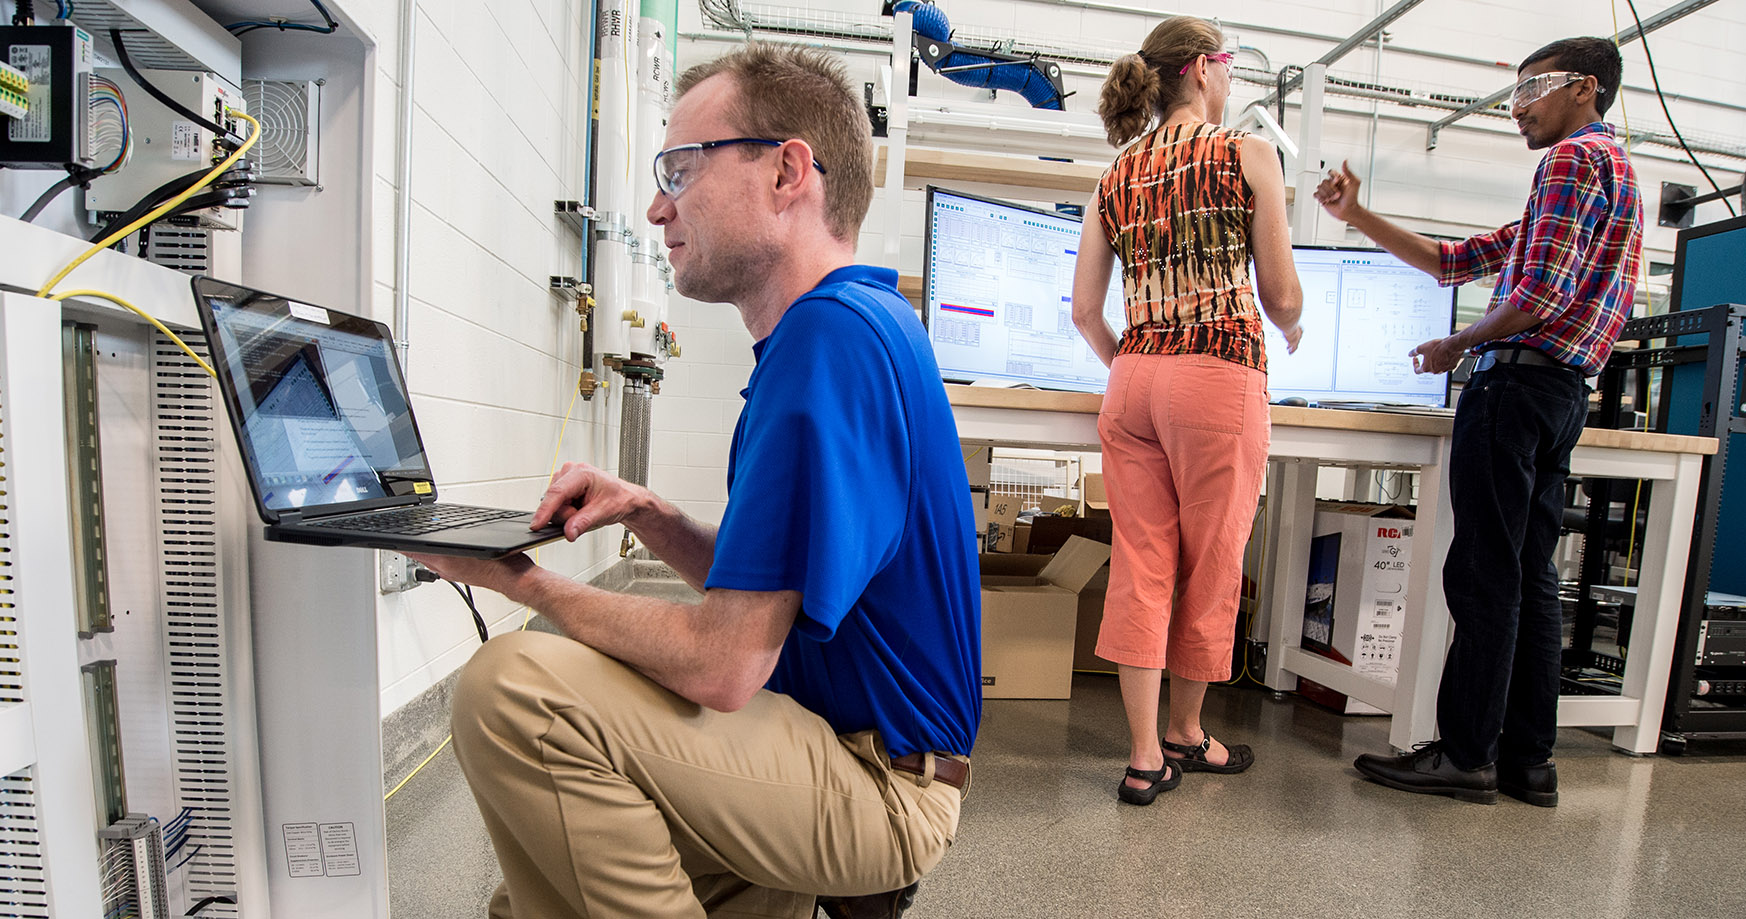 NREL researchers work on controller- and power hardware-in-the-loop test setups to evaluate the performance of microgrid controllers.